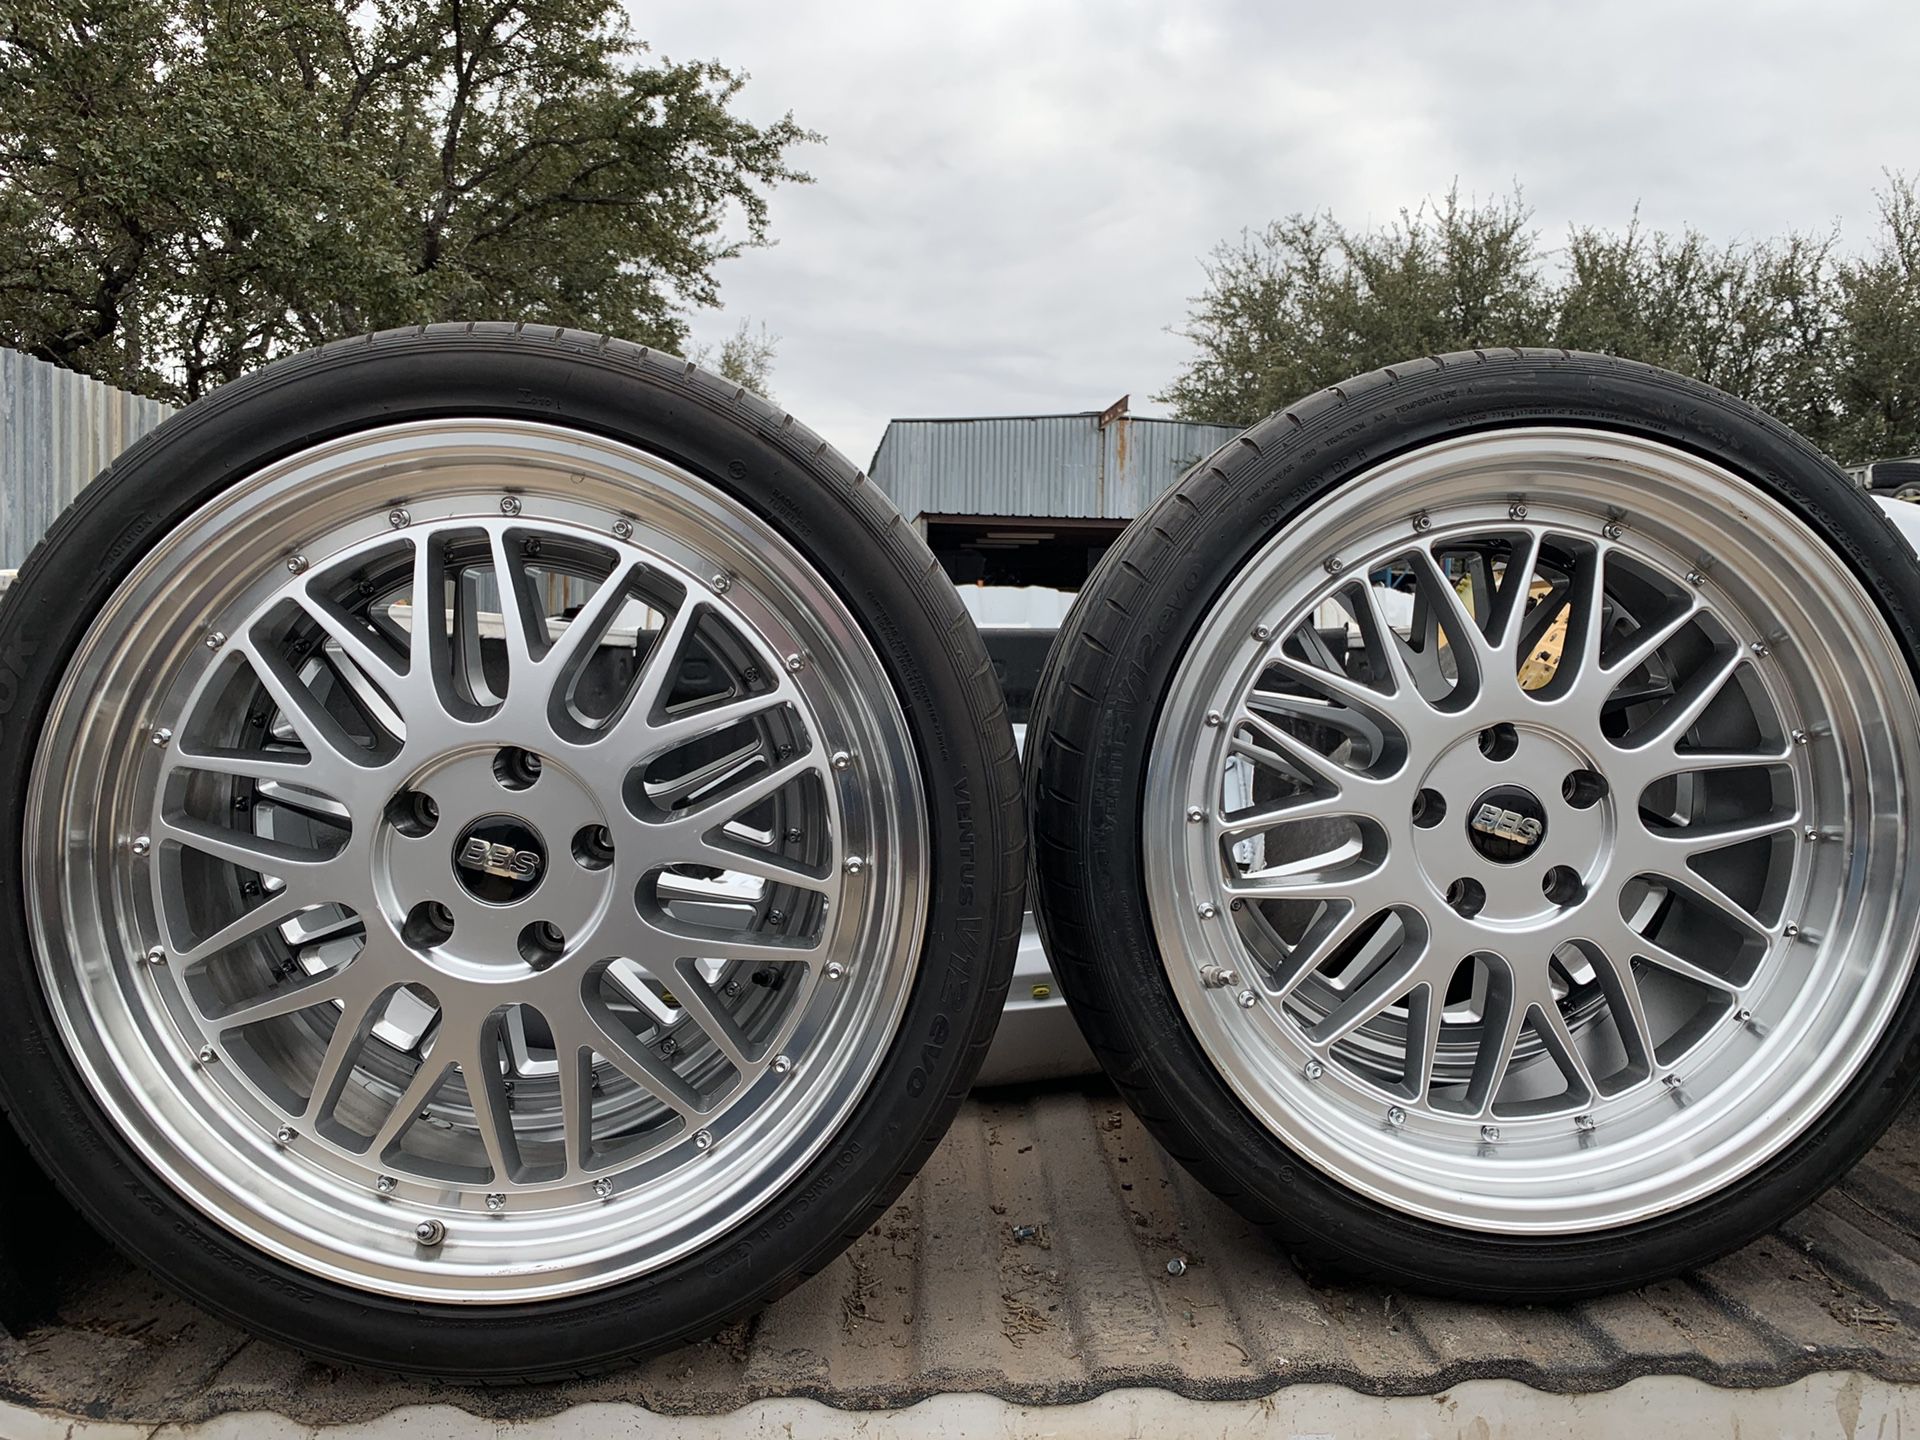 Brand new BBS LM replicas 20” with new tires